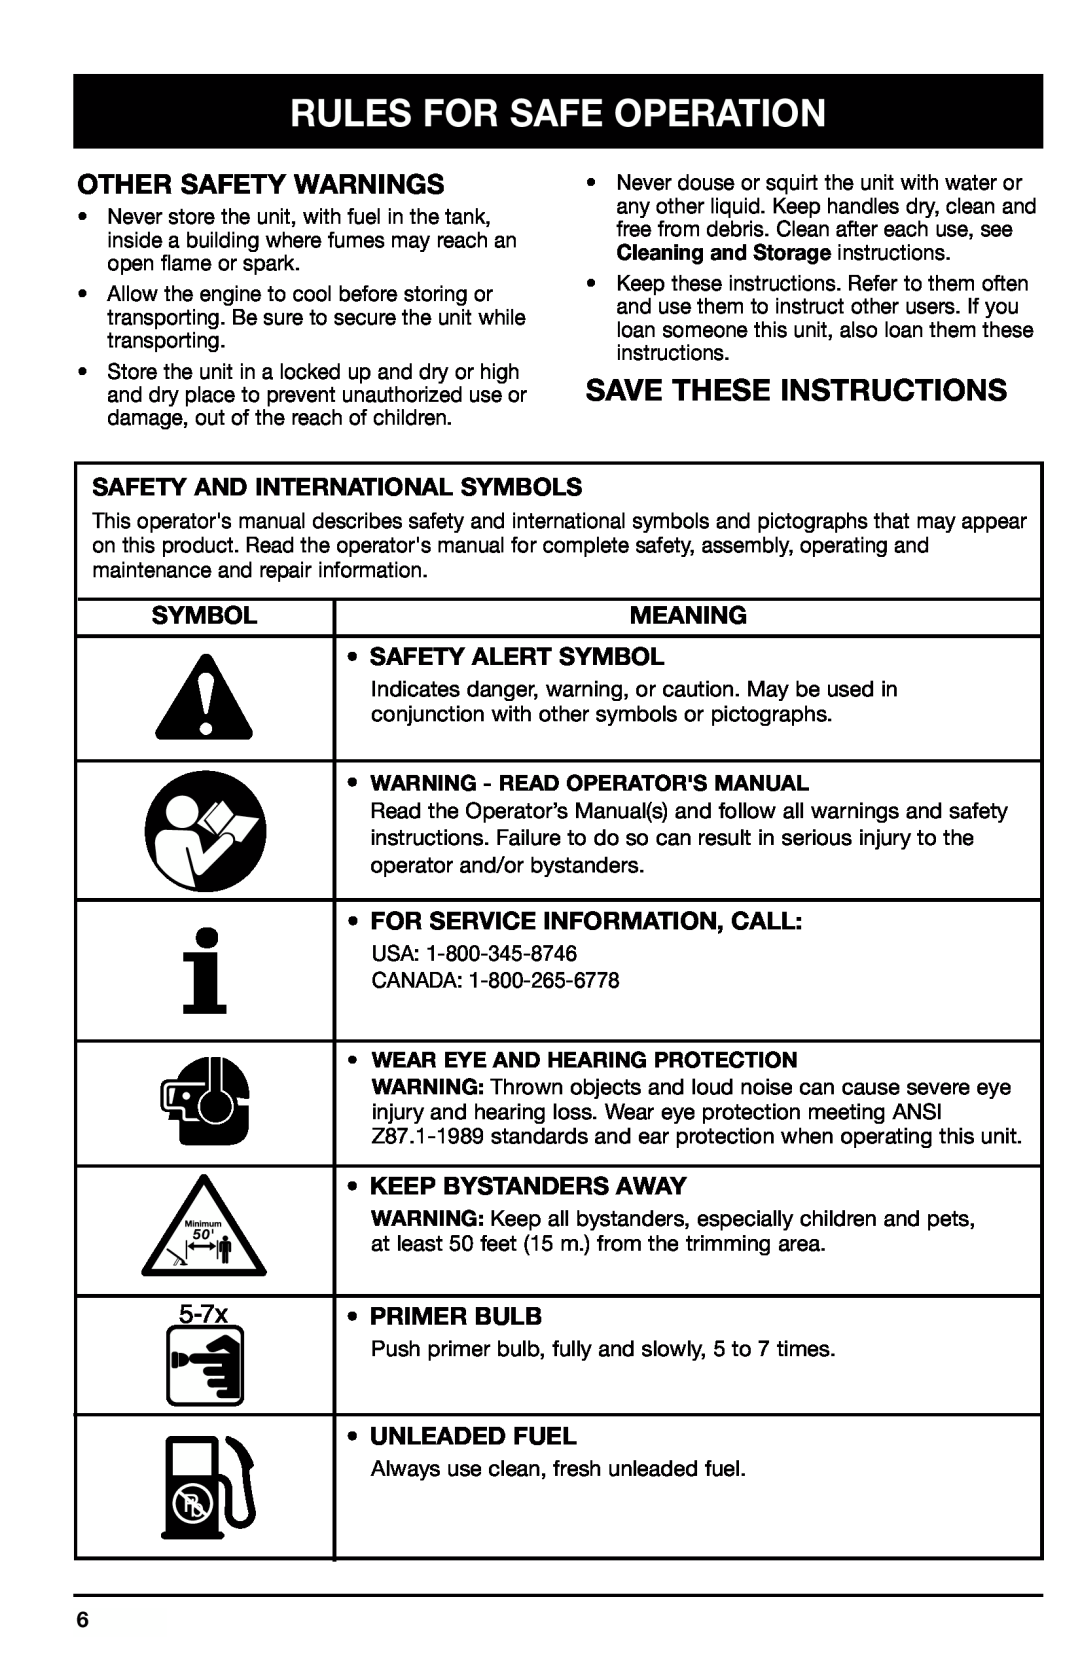 Ryobi 700r Save These Instructions, Other Safety Warnings, Safety And International Symbols, Meaning, Safety Alert Symbol 